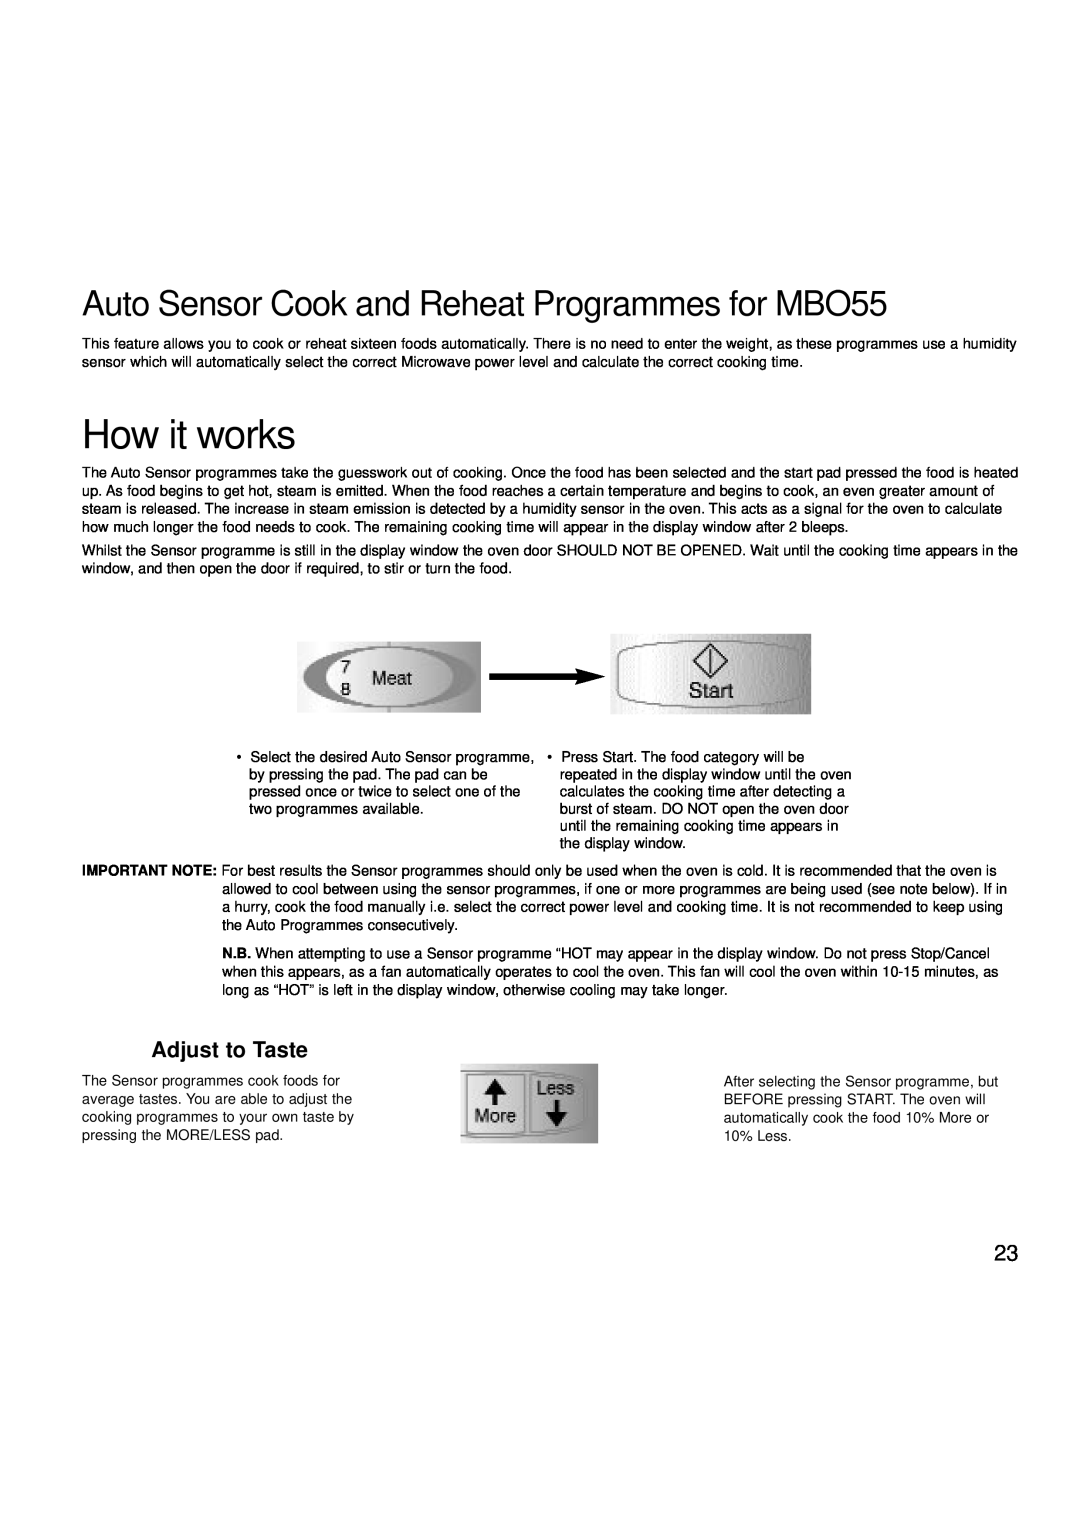 Creda manual How it works, Auto Sensor Cook and Reheat Programmes for MBO55, Adjust to Taste 